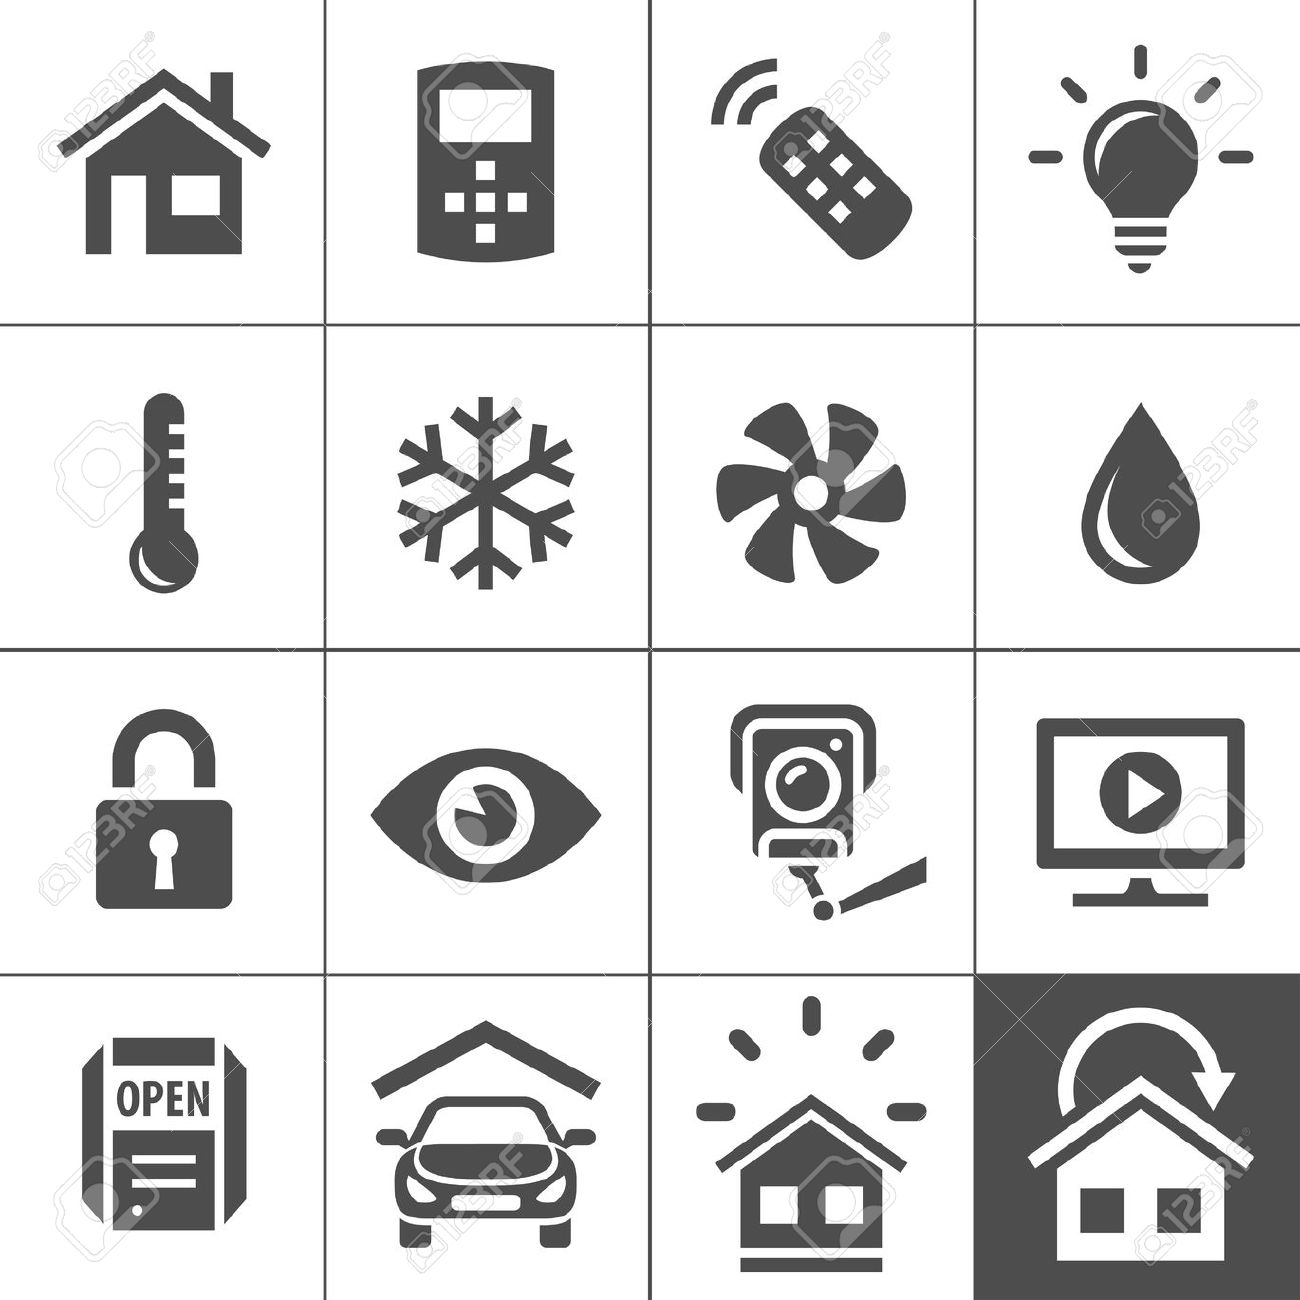 Brain, home automation, house, smart home icon | Icon search engine